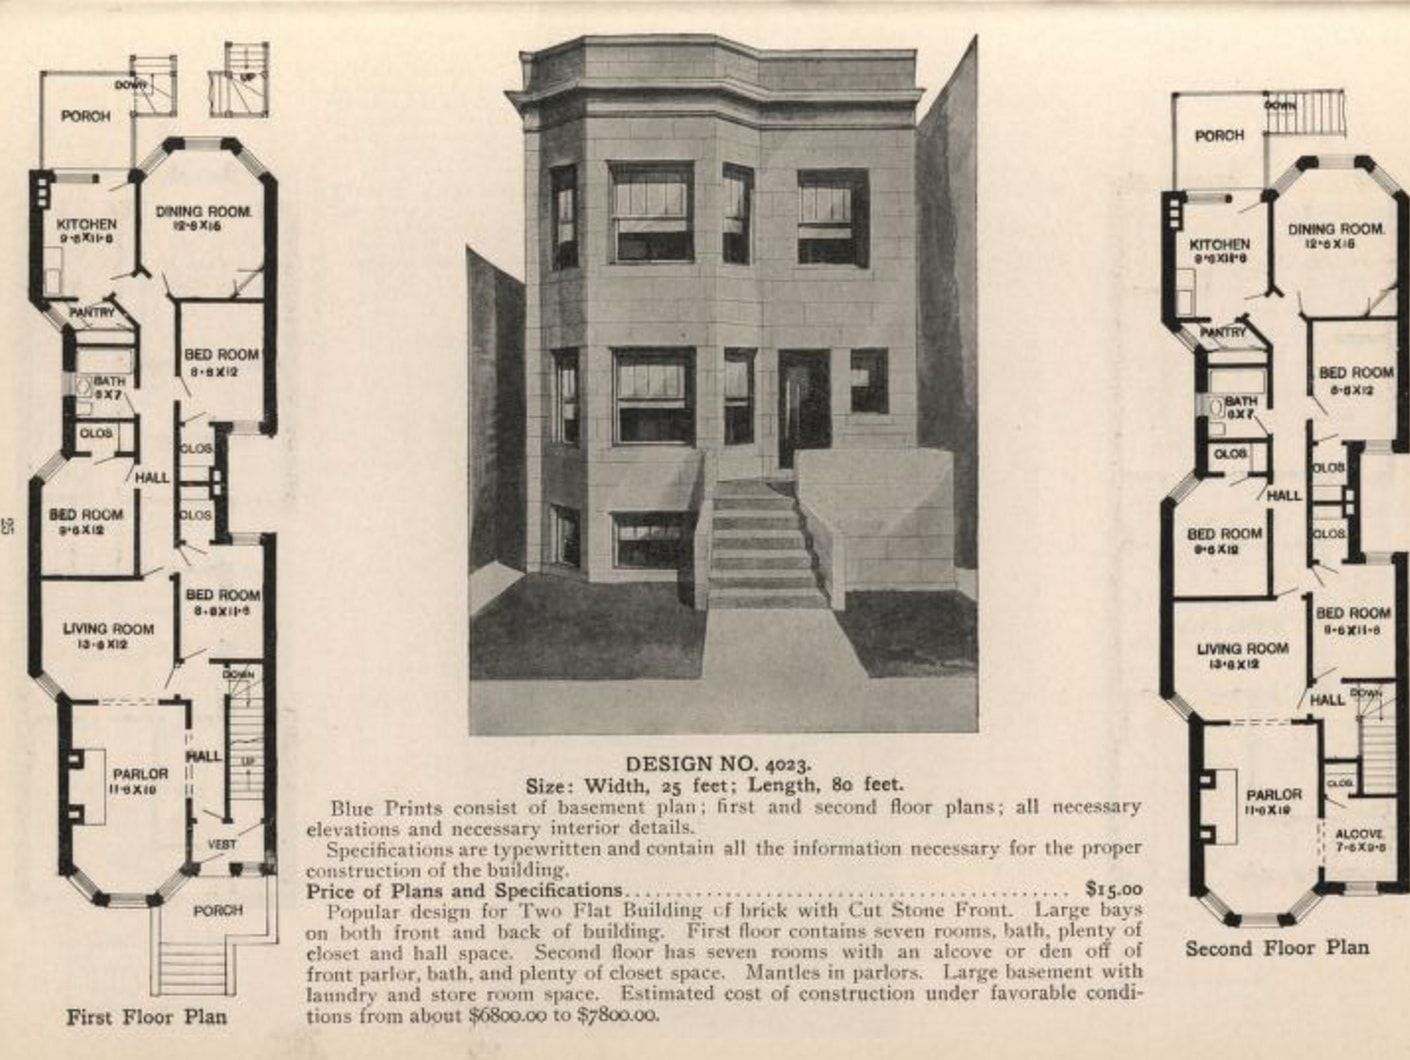 Floorplan for a typical Chicago greystone, from Radford's